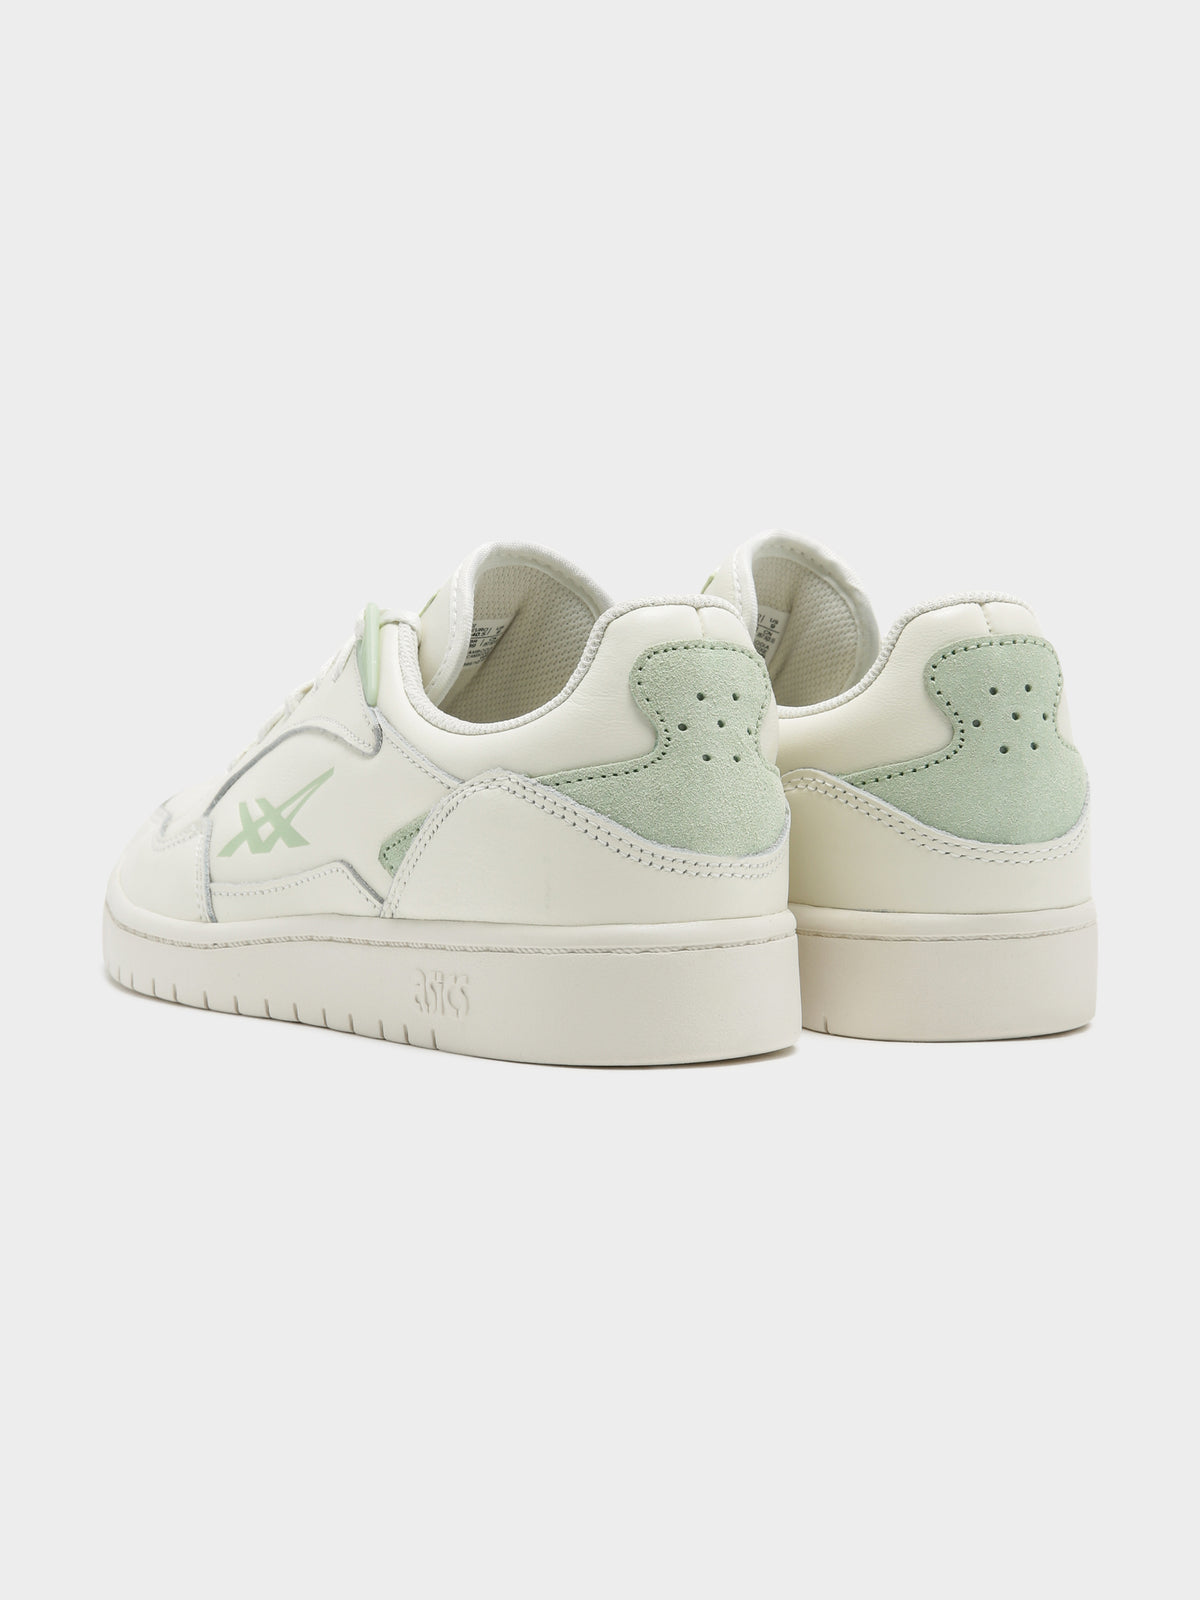 Womens Skycourt Sneakers in Cream and Jade